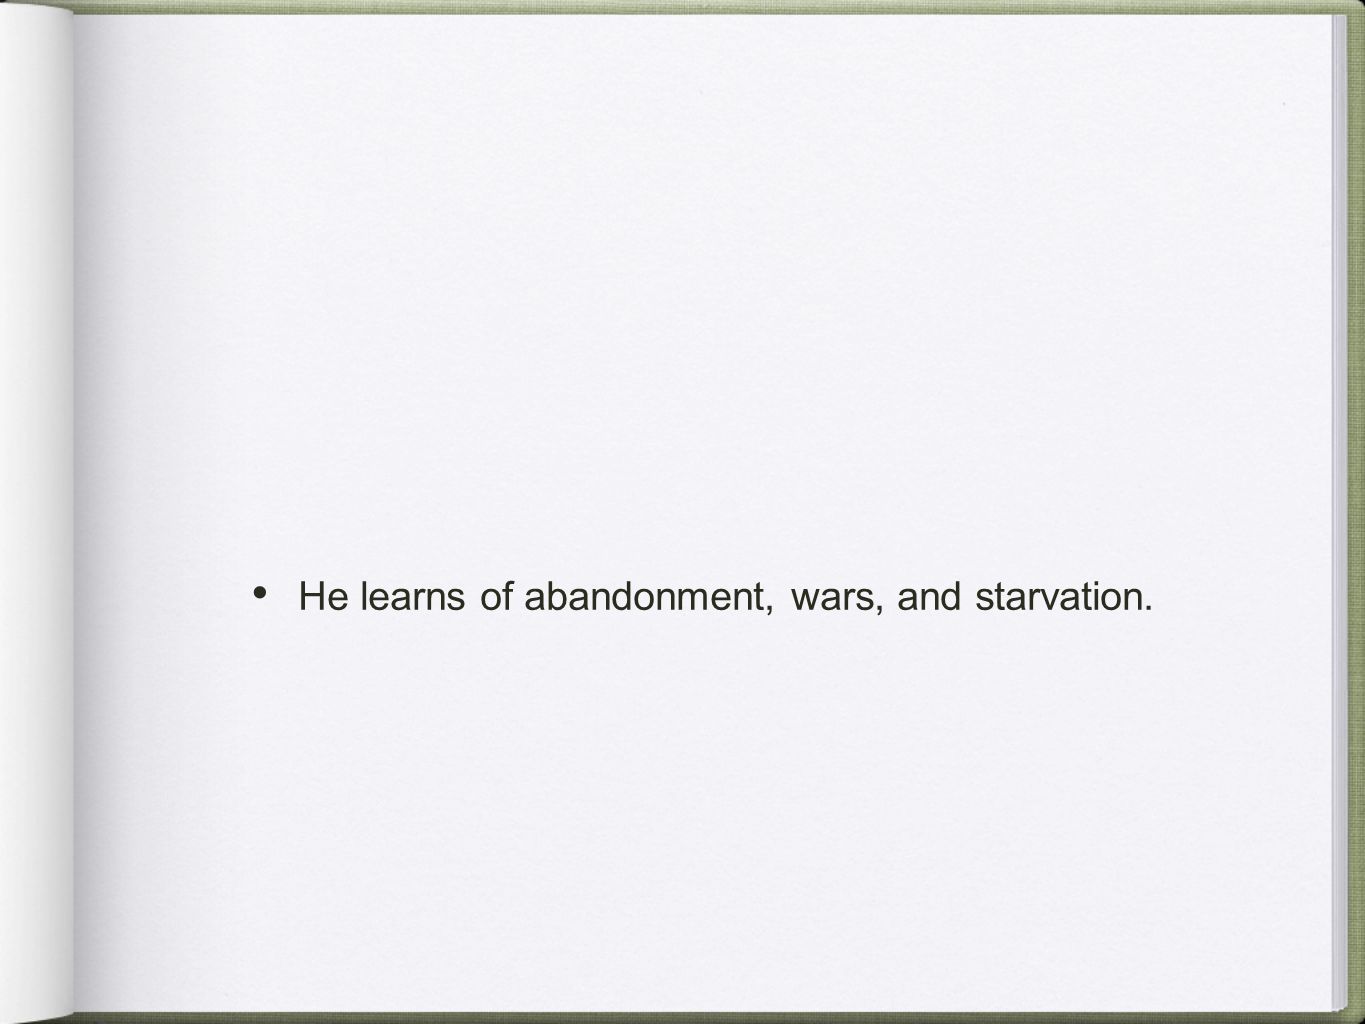 He learns of abandonment, wars, and starvation.